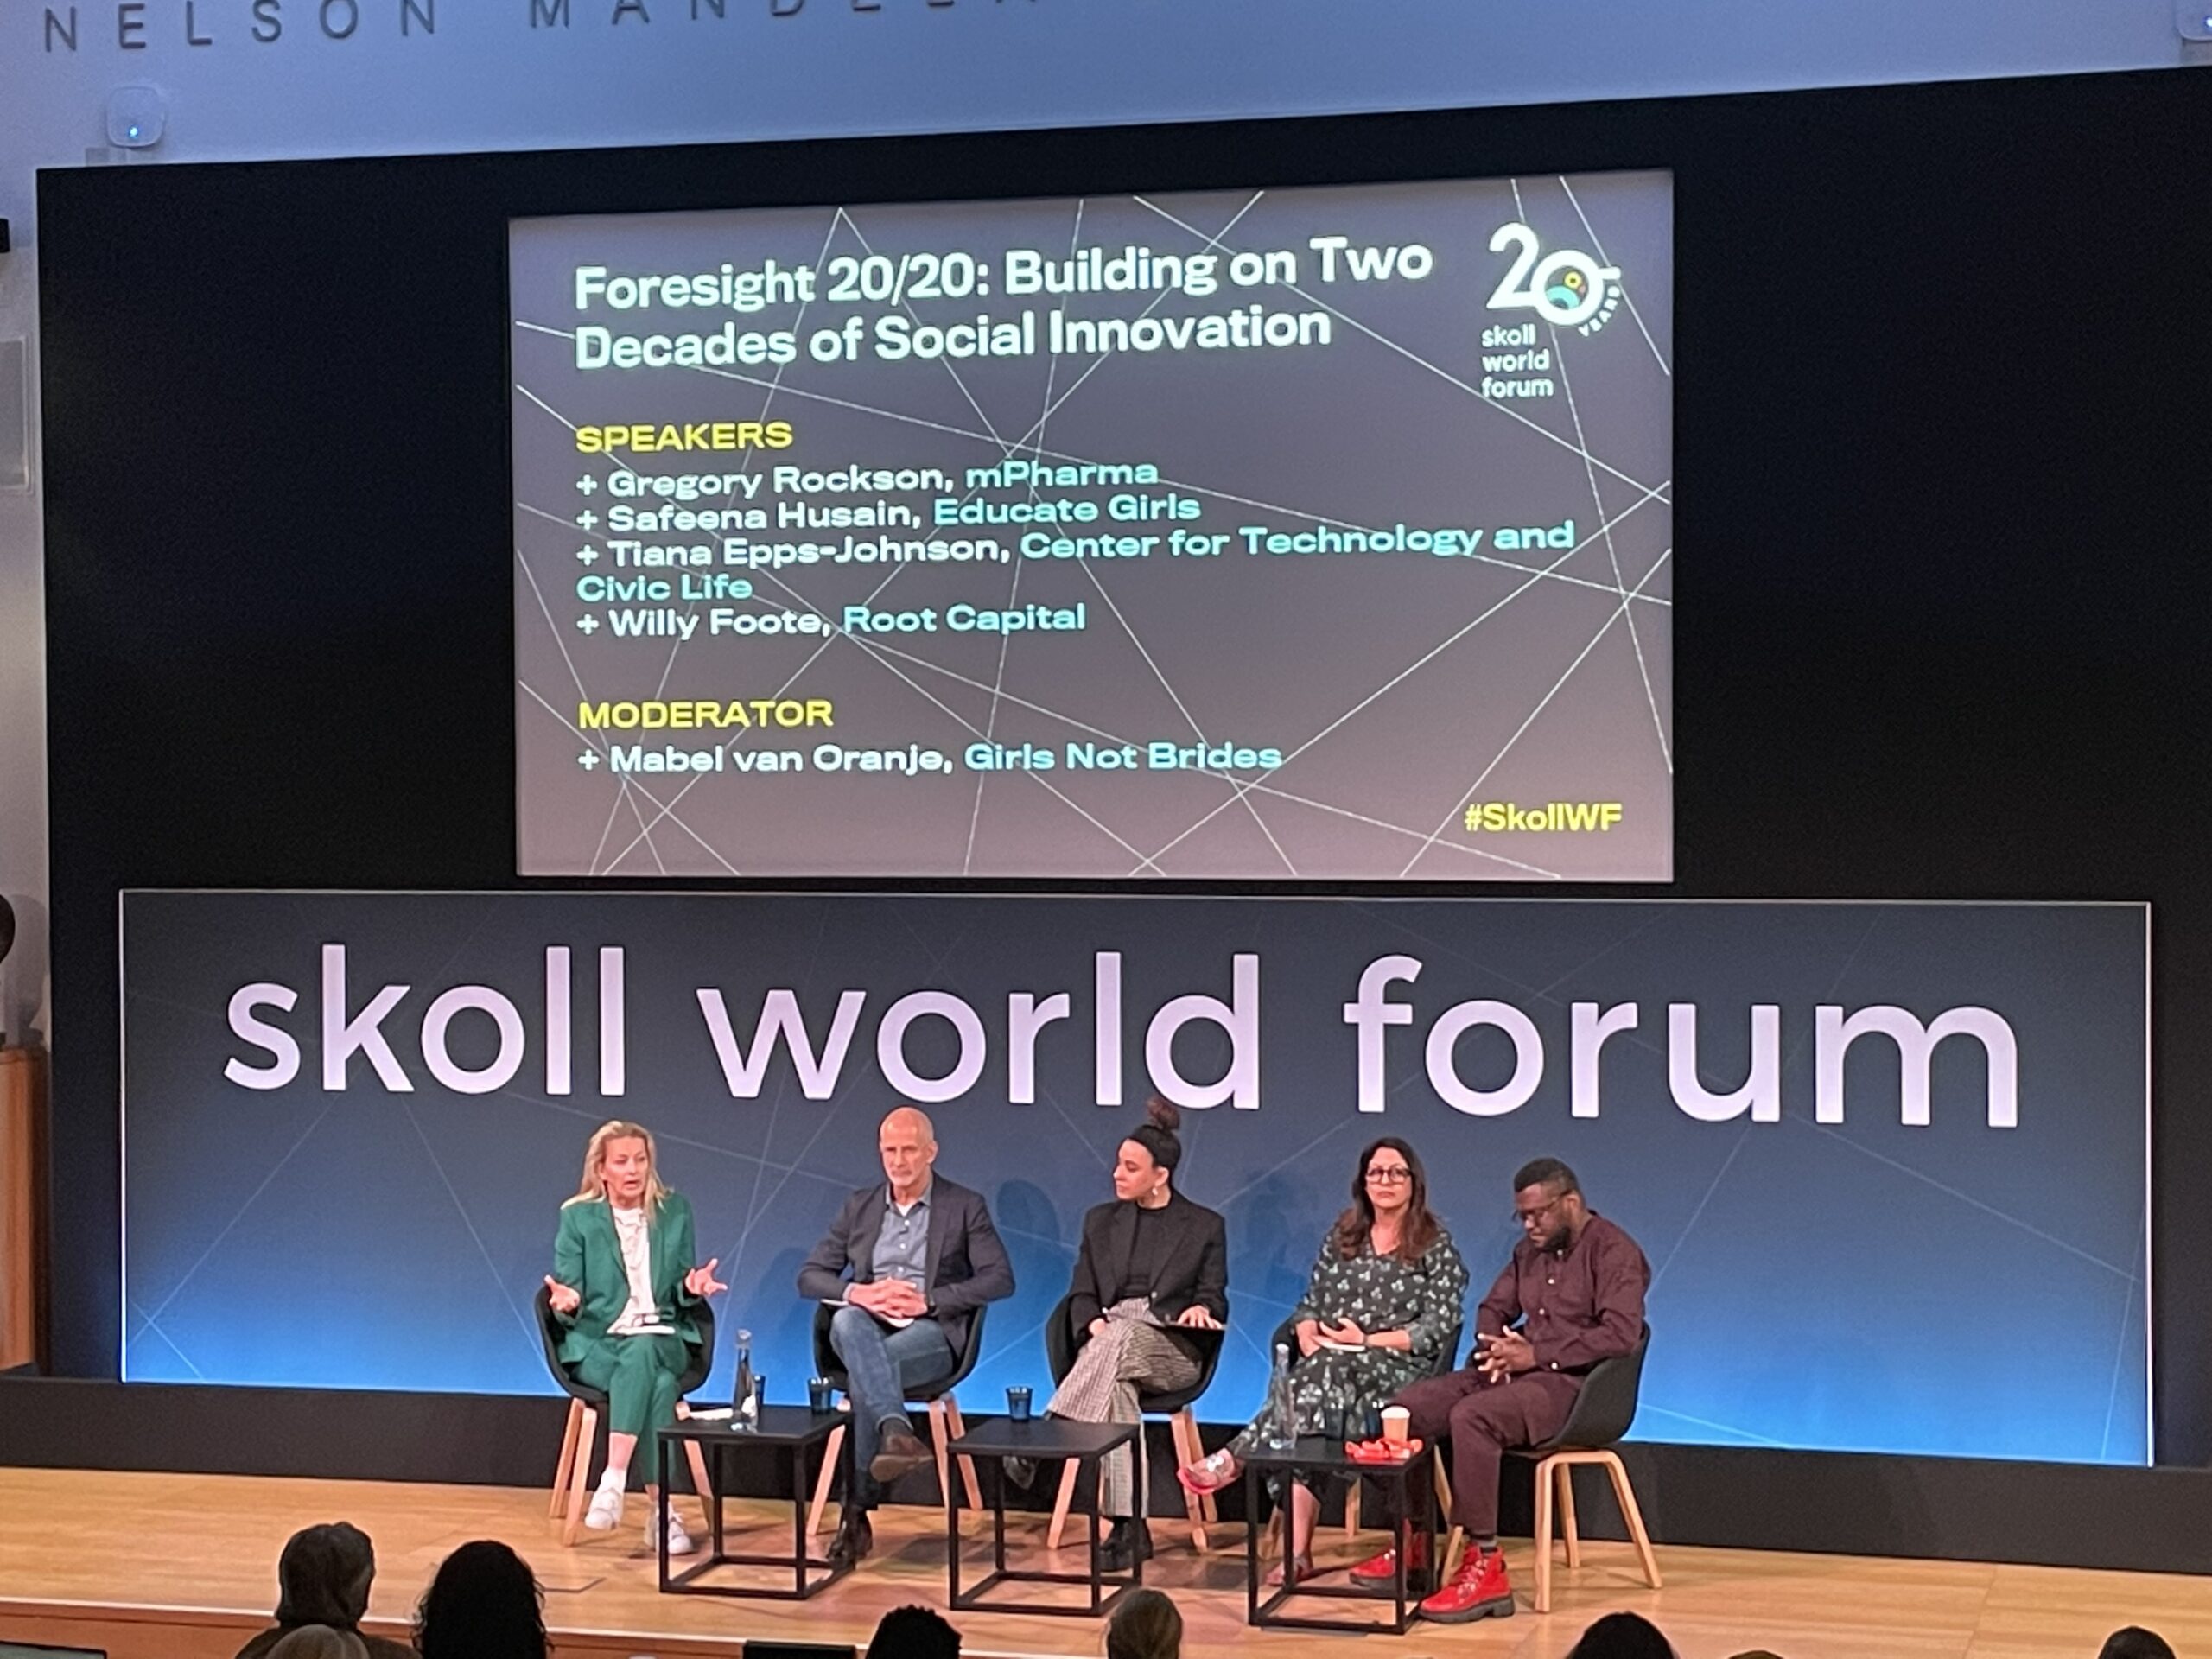 Pictured from left: Mabel van Oranje from Girls Not Brides, Root Capital Founder and CEO Willy Foote, Tiana Epps-Johnson from the Center for Technology and Civic Life, Safeena Husain from Educate Girls, and Gregory Rockson from mPharma at the Skoll World Forum.